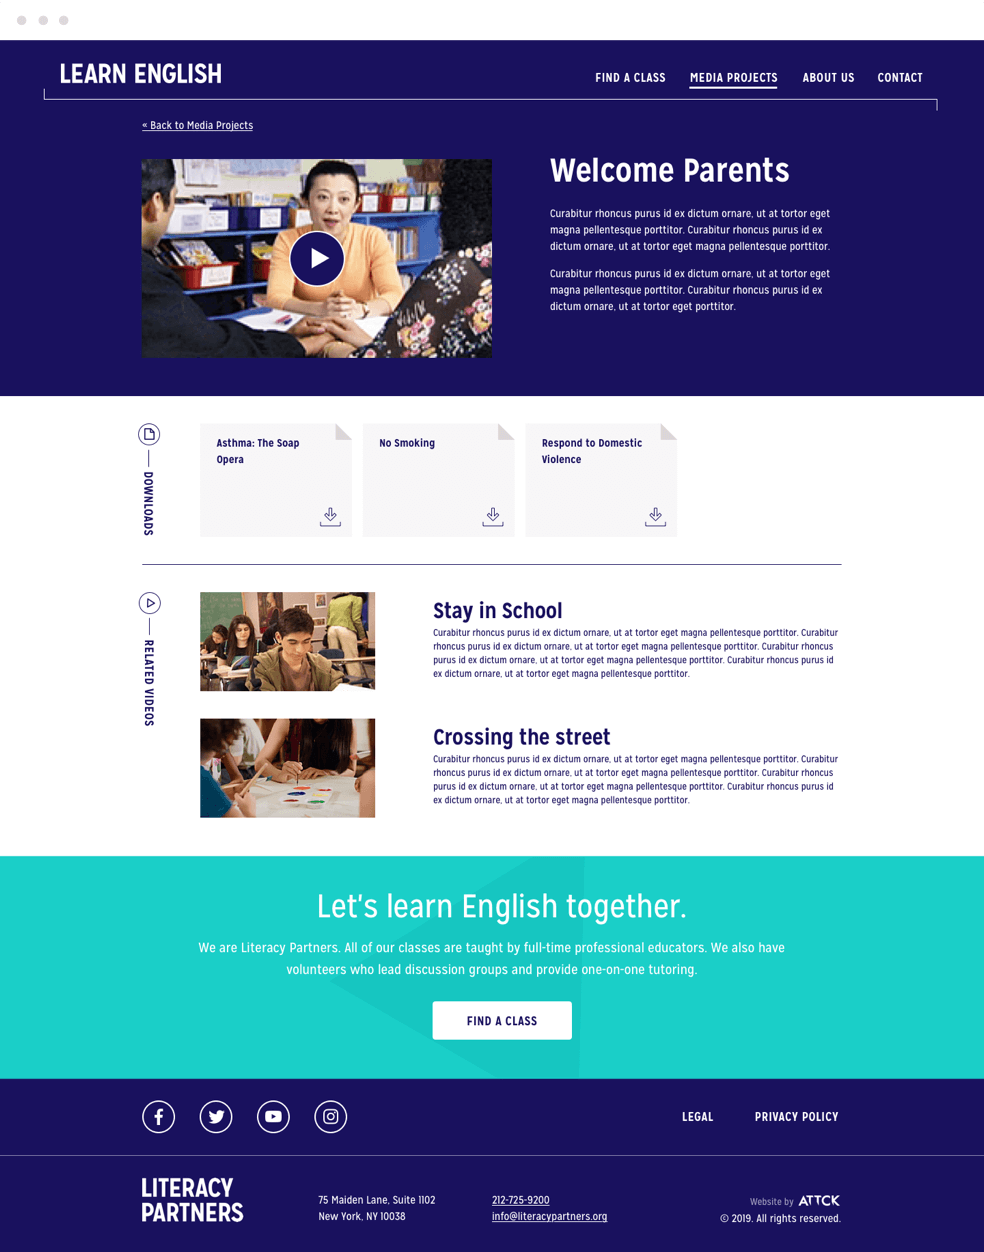 Learn English Welcome Parents page. ATTCK case study.